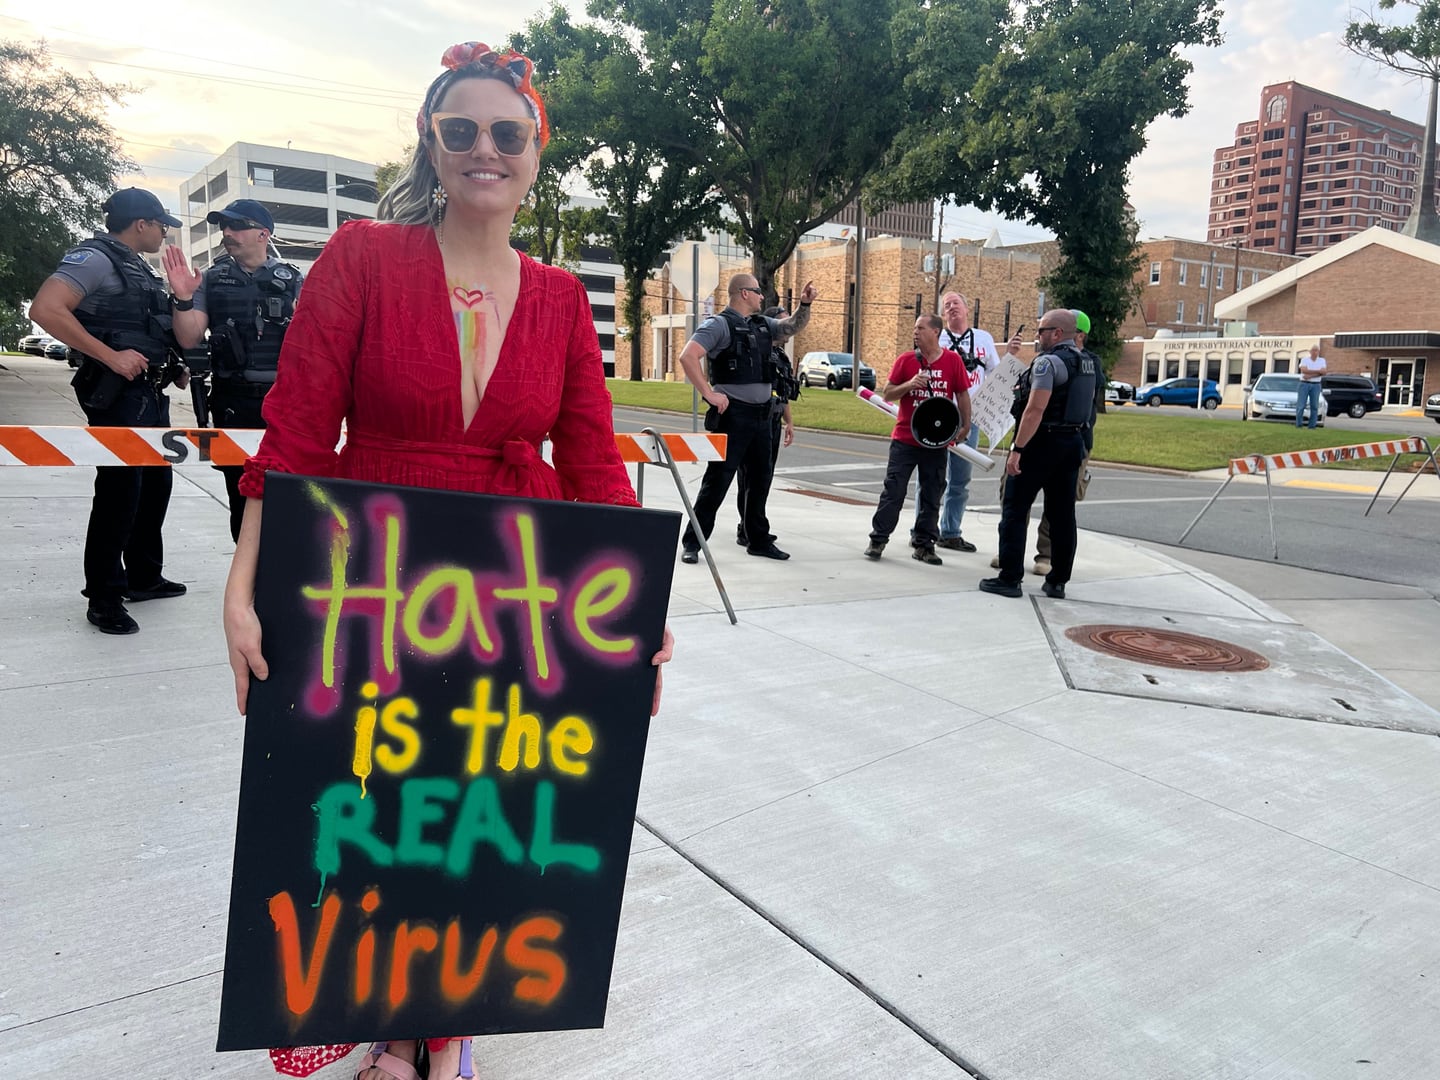 Small crowd protests Bartlesville Pride event over drag show Mix 96.5